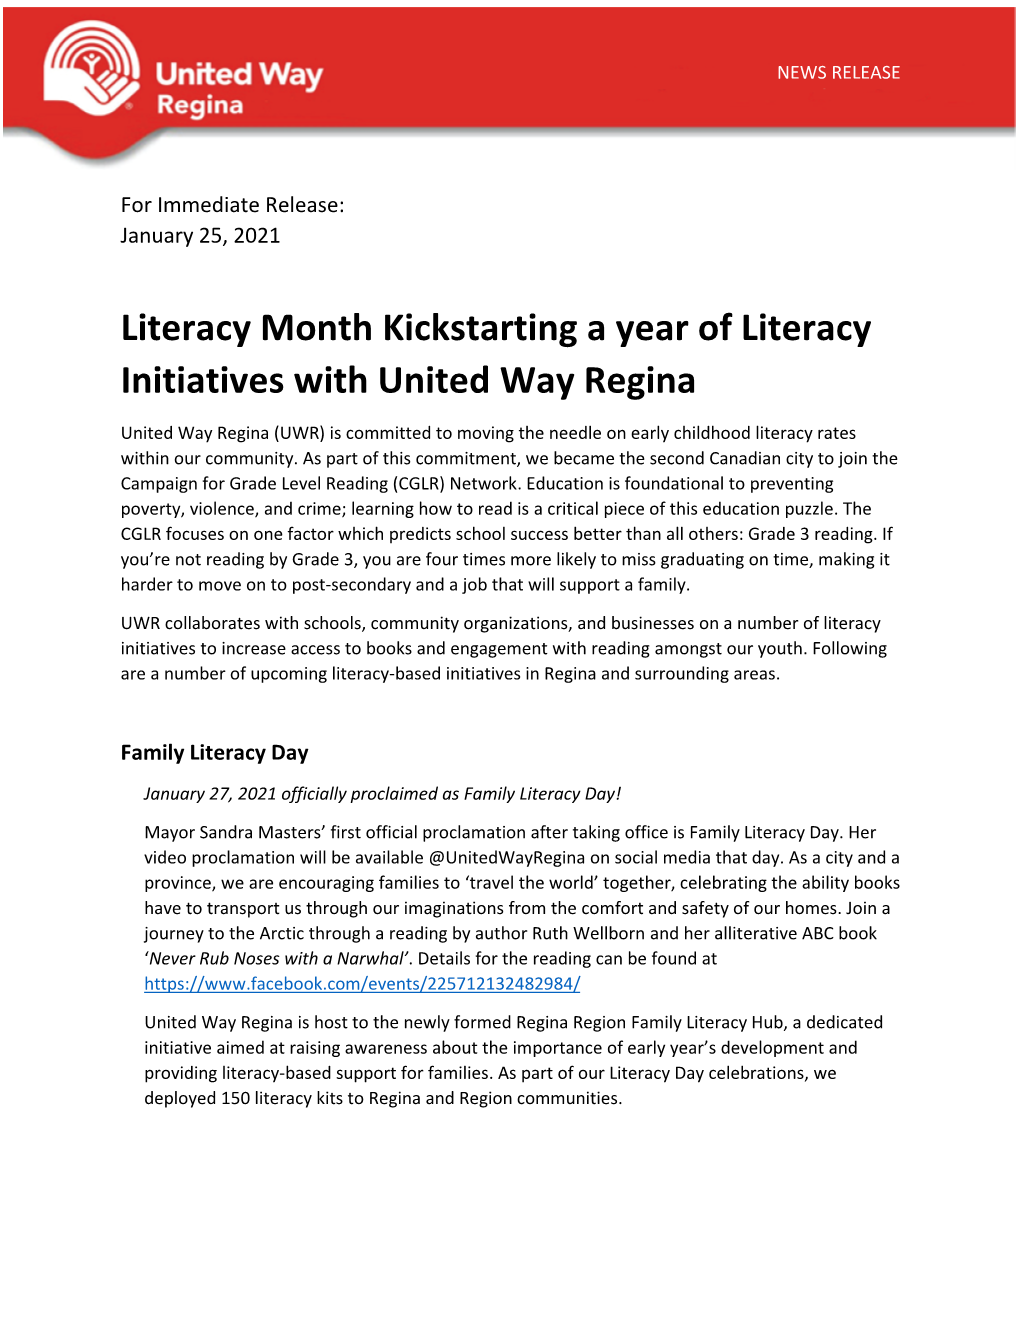 Literacy Month Kickstarting a Year of Literacy Initiatives with United Way Regina